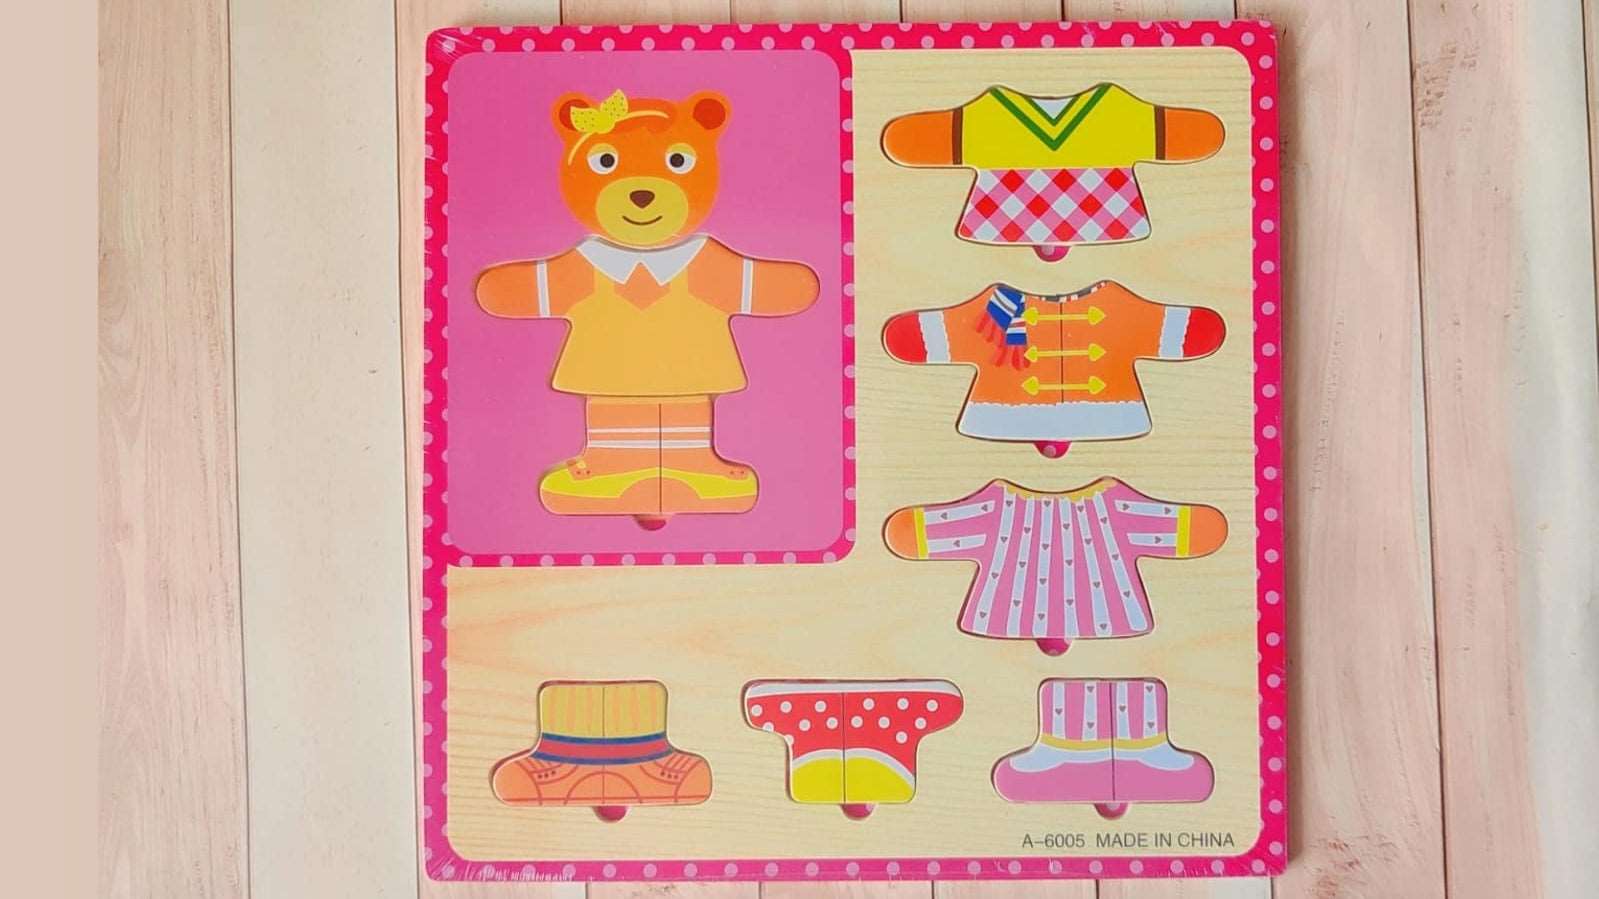 Teddy dress matching puzzle